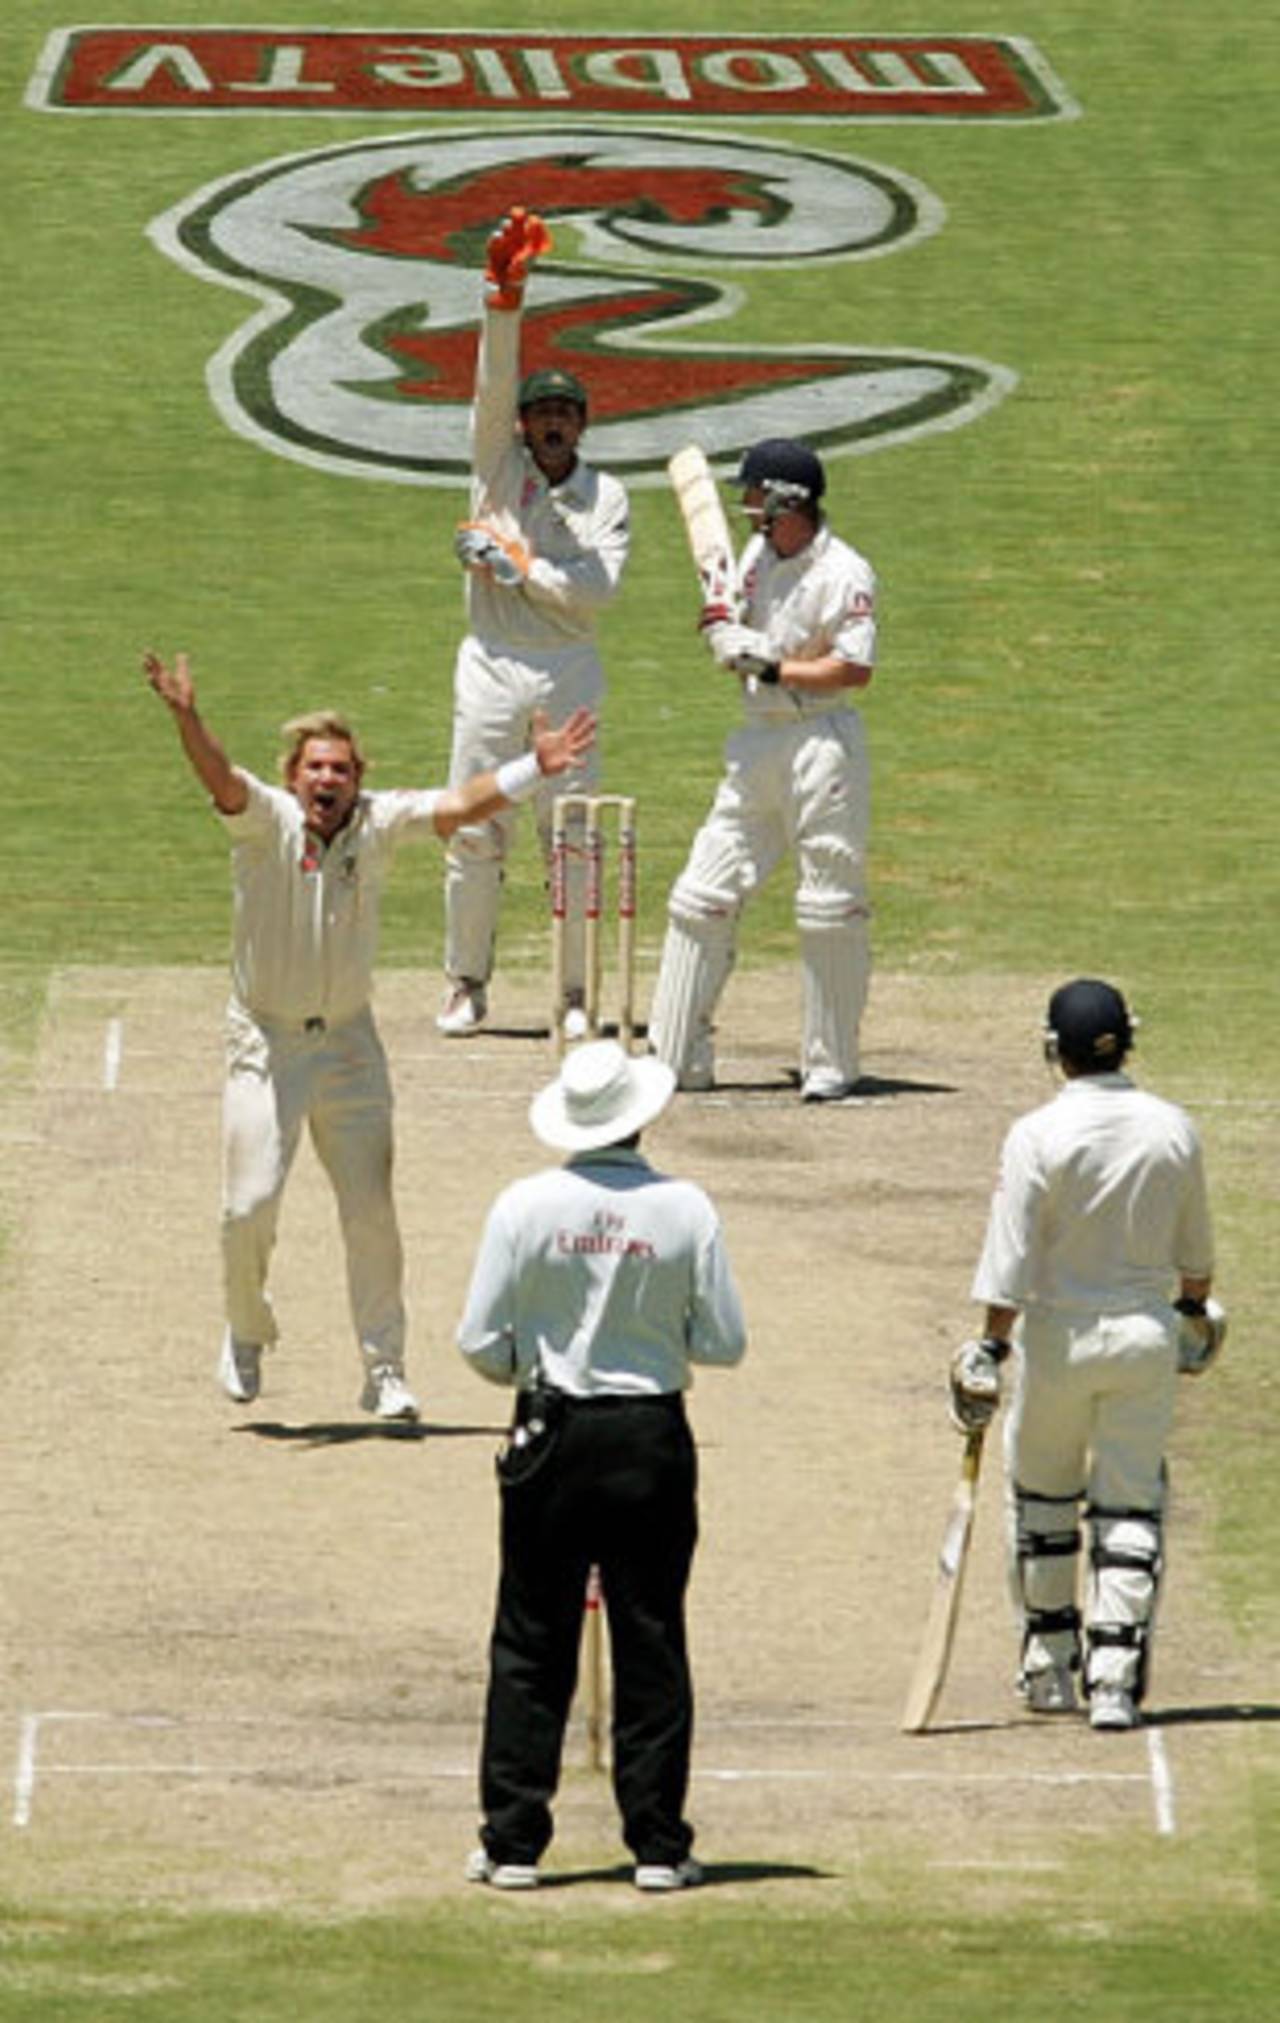 Shane Warne roars an appeal against Paul Collingwood which is turned down, Australia v England, 2nd Test, Adelaide, December 5, 2006